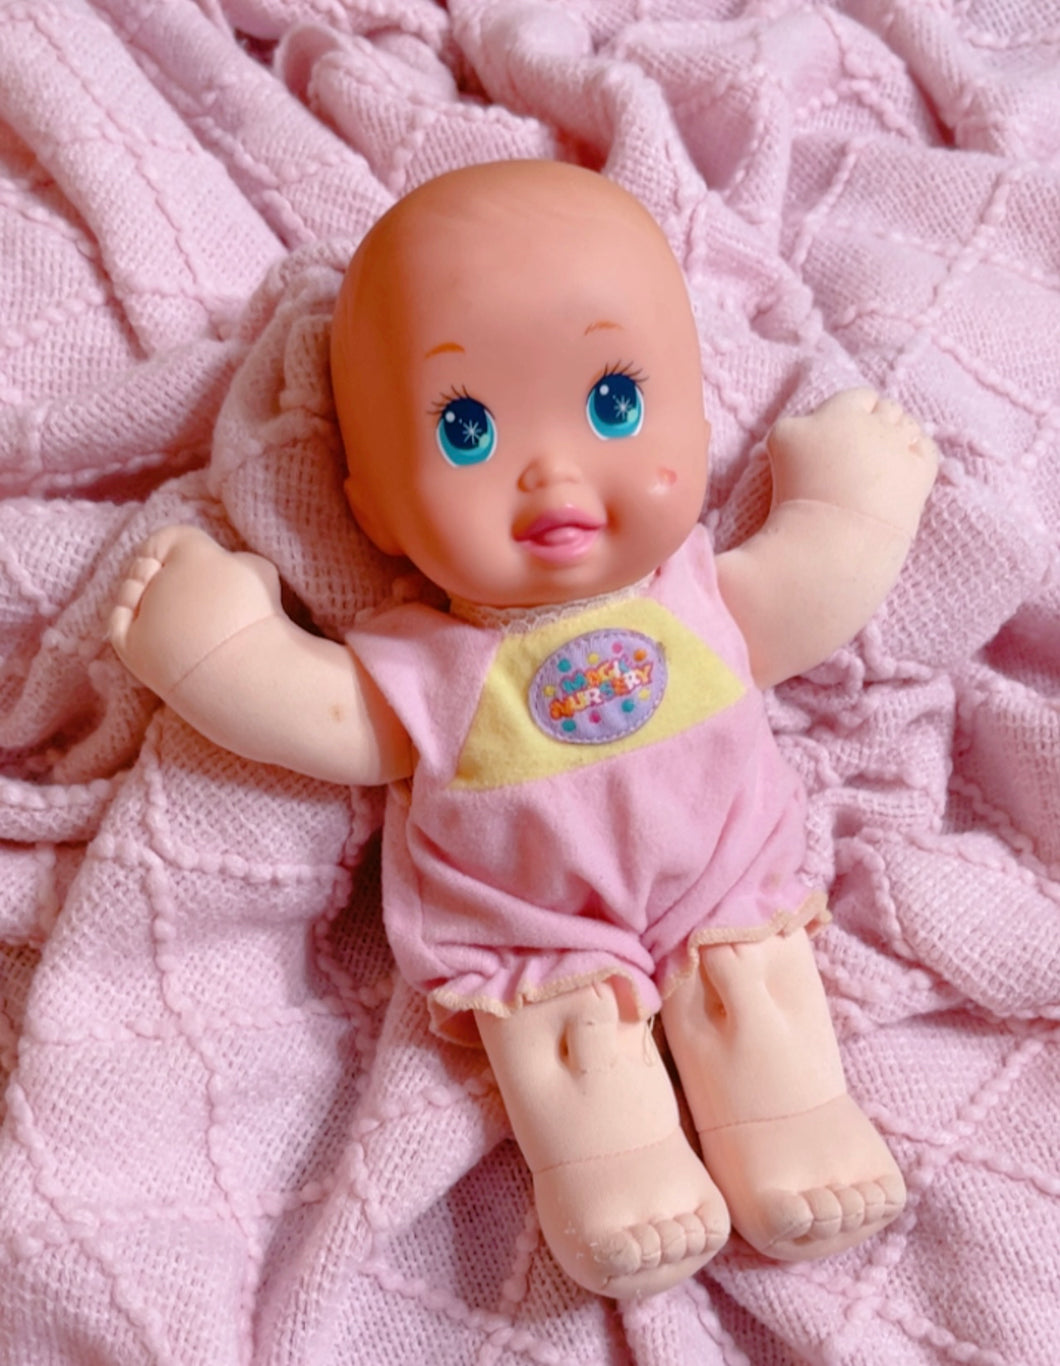 1991 - Large Magic Nursery Baby doll toy - 10” tall